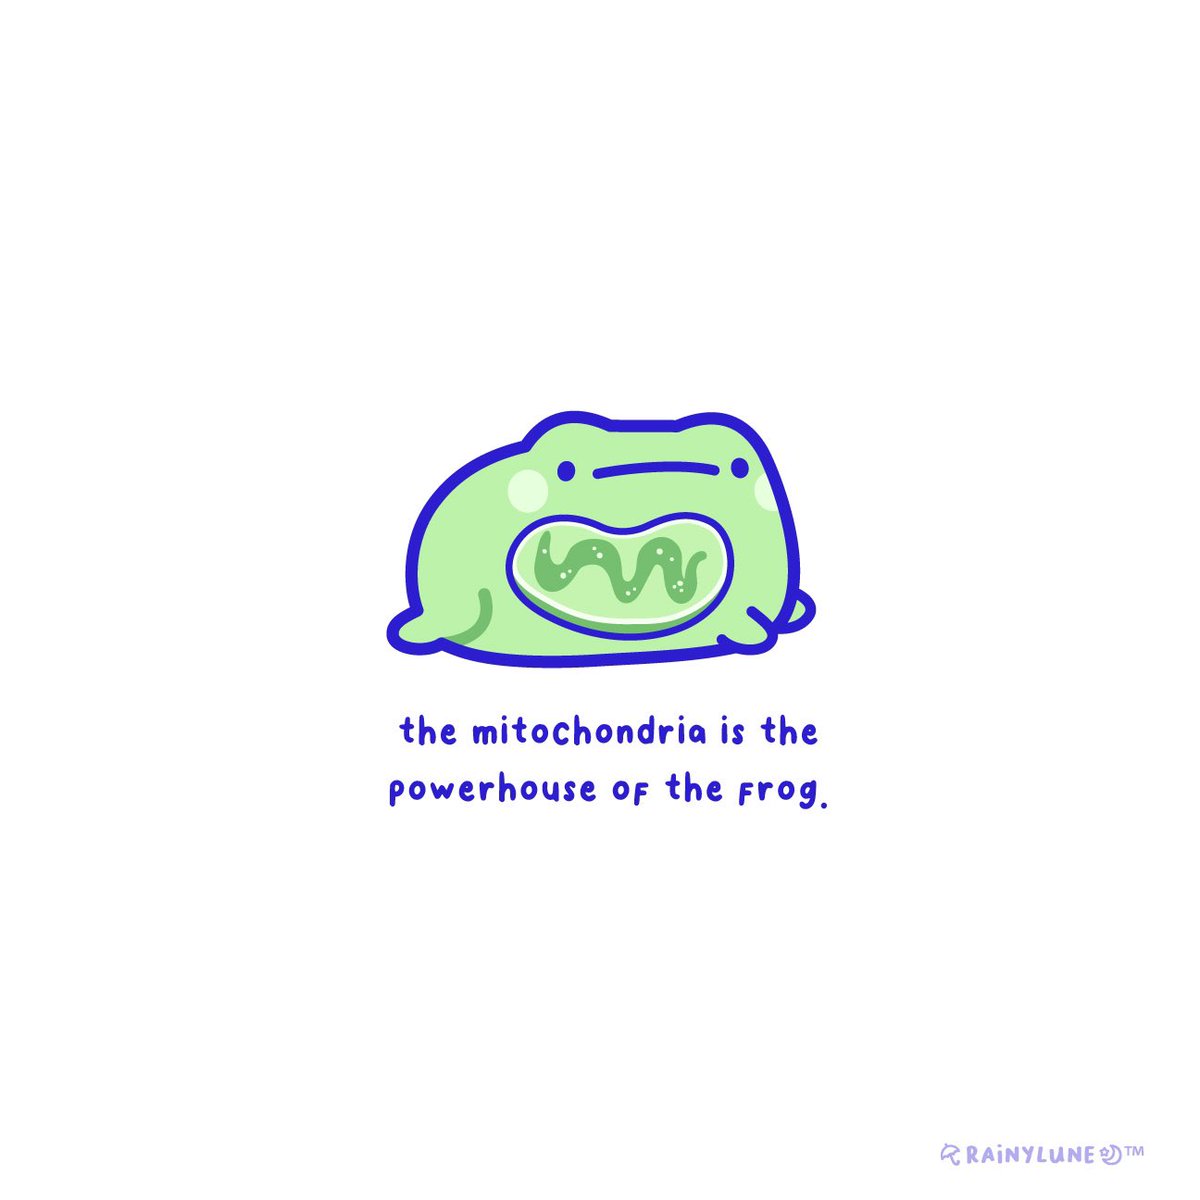 mitochondria is the powerhouse of the frog